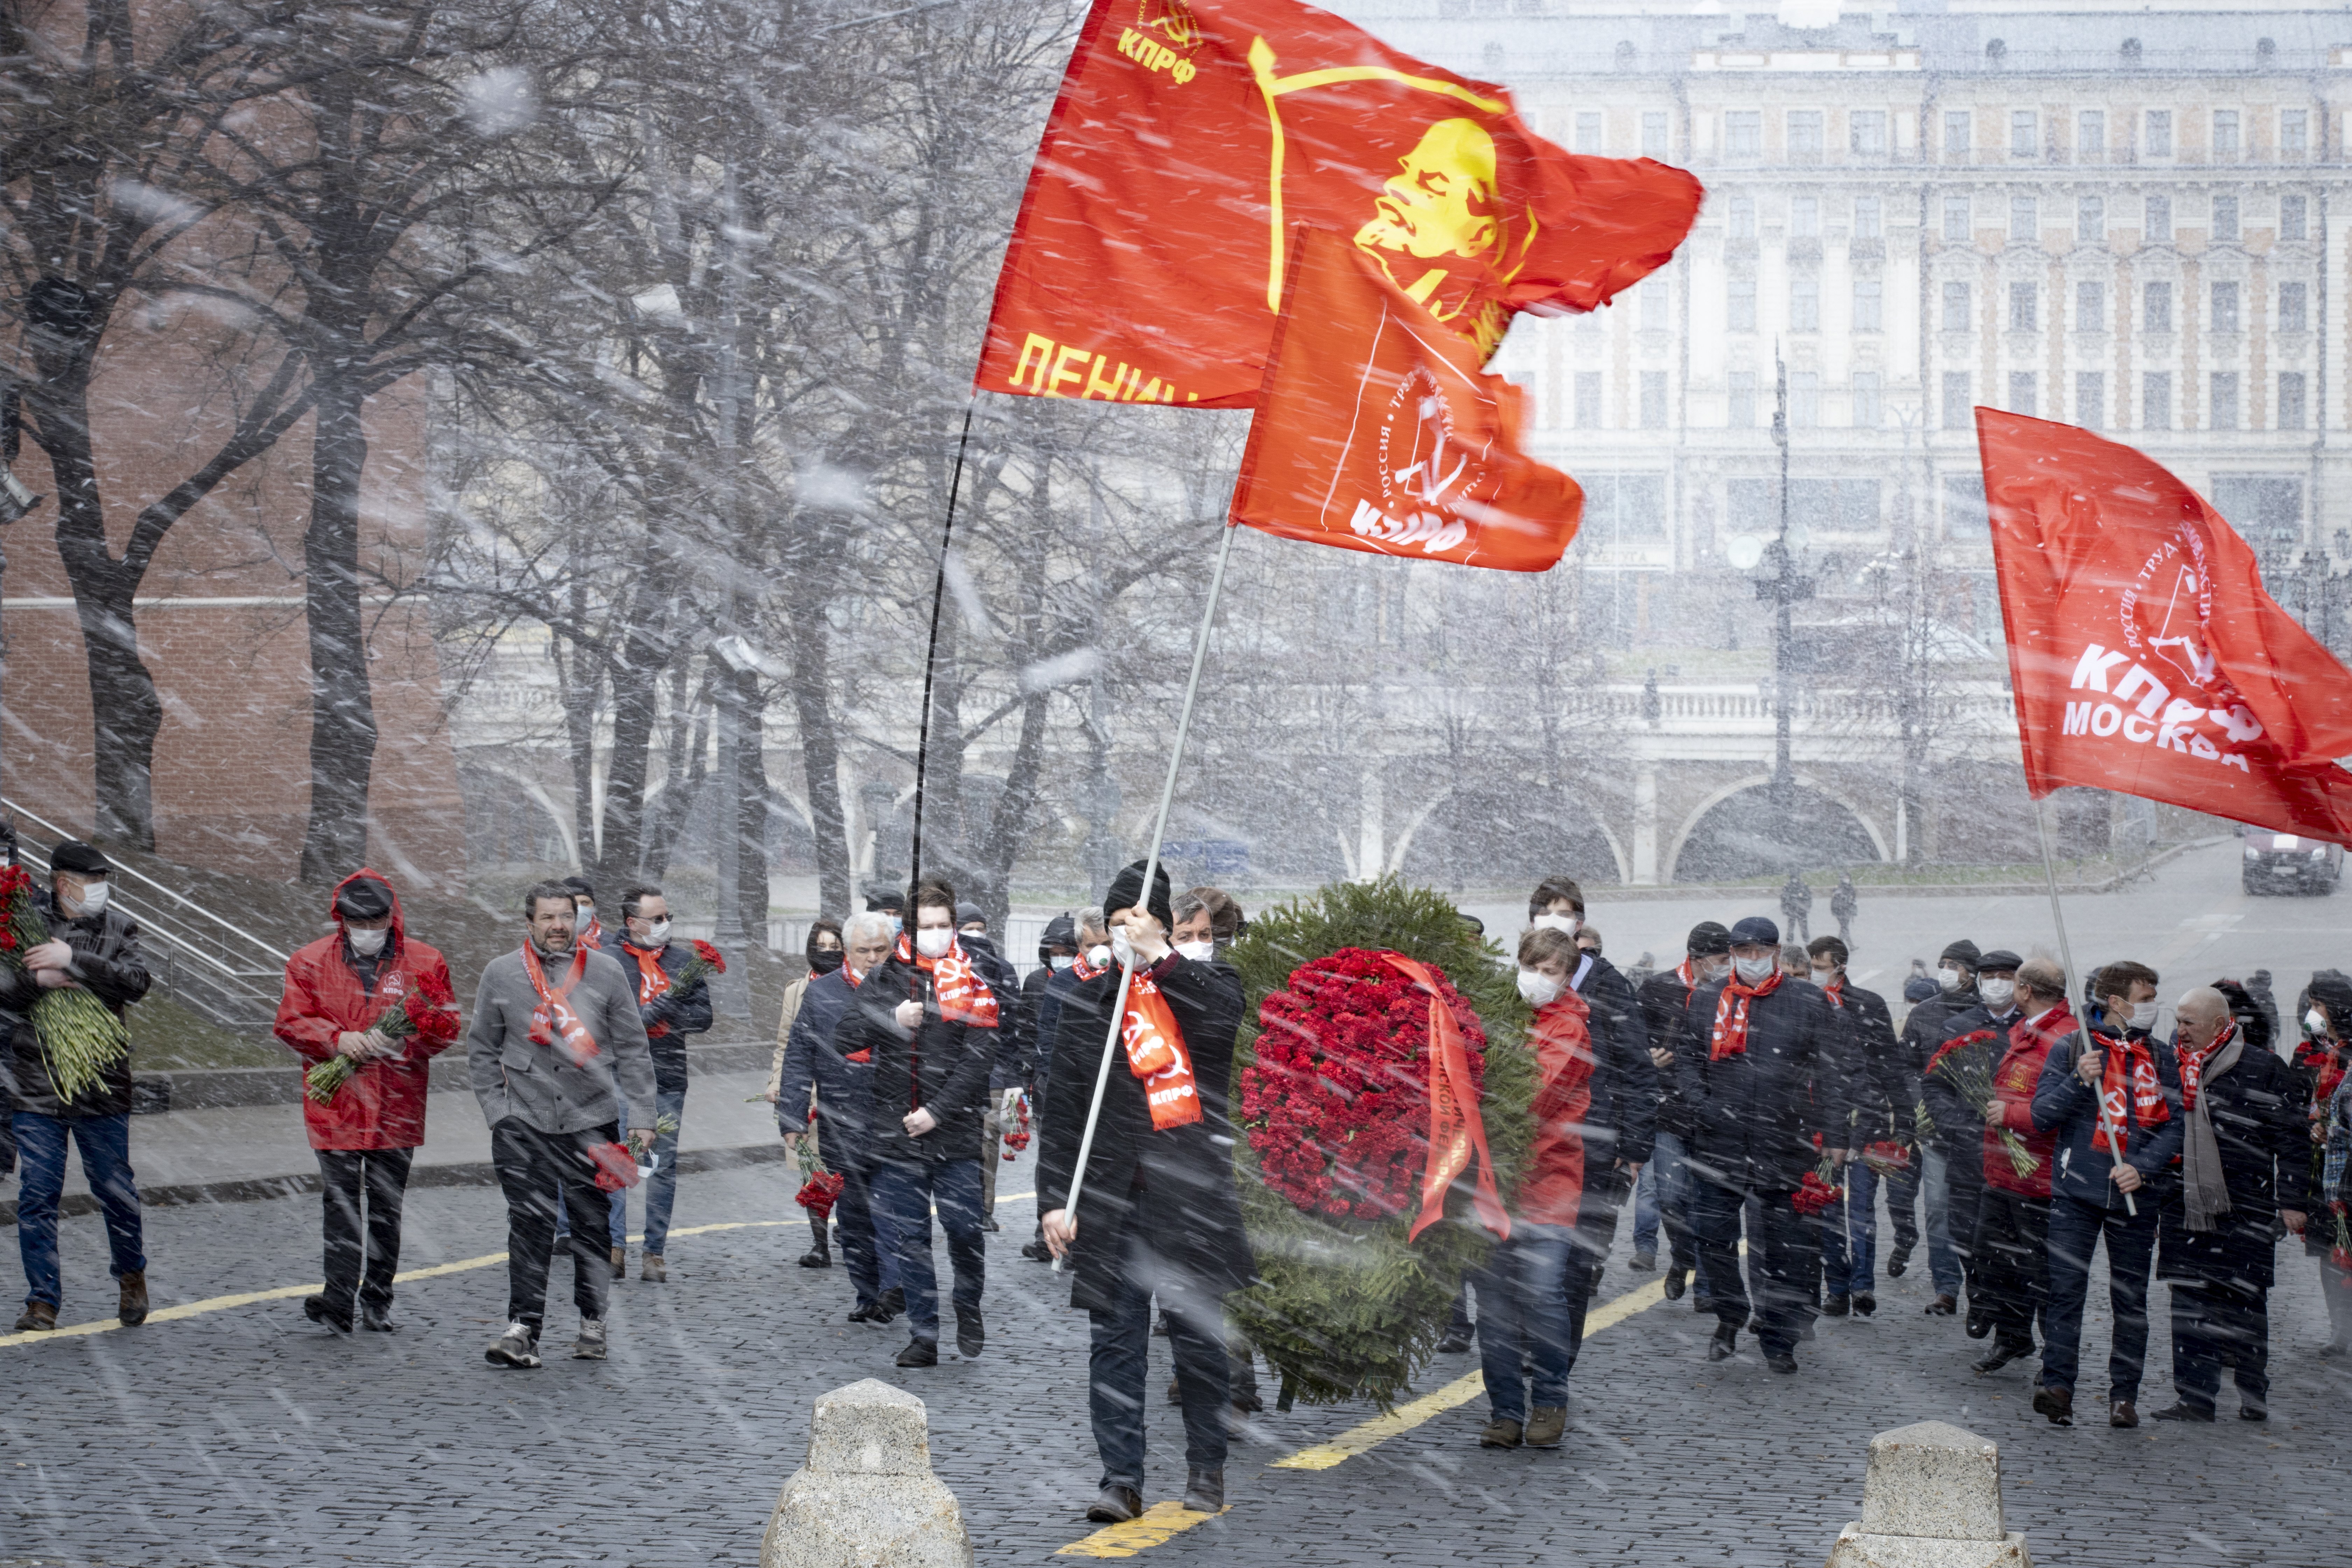 Russian communists and supporters, some of them wearing face masks to protect against coronavirus, observe social distancing guidelines as they walk under a snowfall to visit the Mausoleum of the Soviet founder Vladimir Lenin to mark the 150th anniversary of his birth, at Moscow's Red Square during a snowfall in Moscow, Russia, Wednesday, April 22, 2020. Russia's Communist Party traditionally marks the birthday of Soviet founder Vlaimir Lenin every year. This year was no exception, even though Muscovites are currently not allowed to leave their homes unless for work, grocery shopping, visiting a doctor or taking out the trash. (AP Photo/Alexander Zemlianichenko)